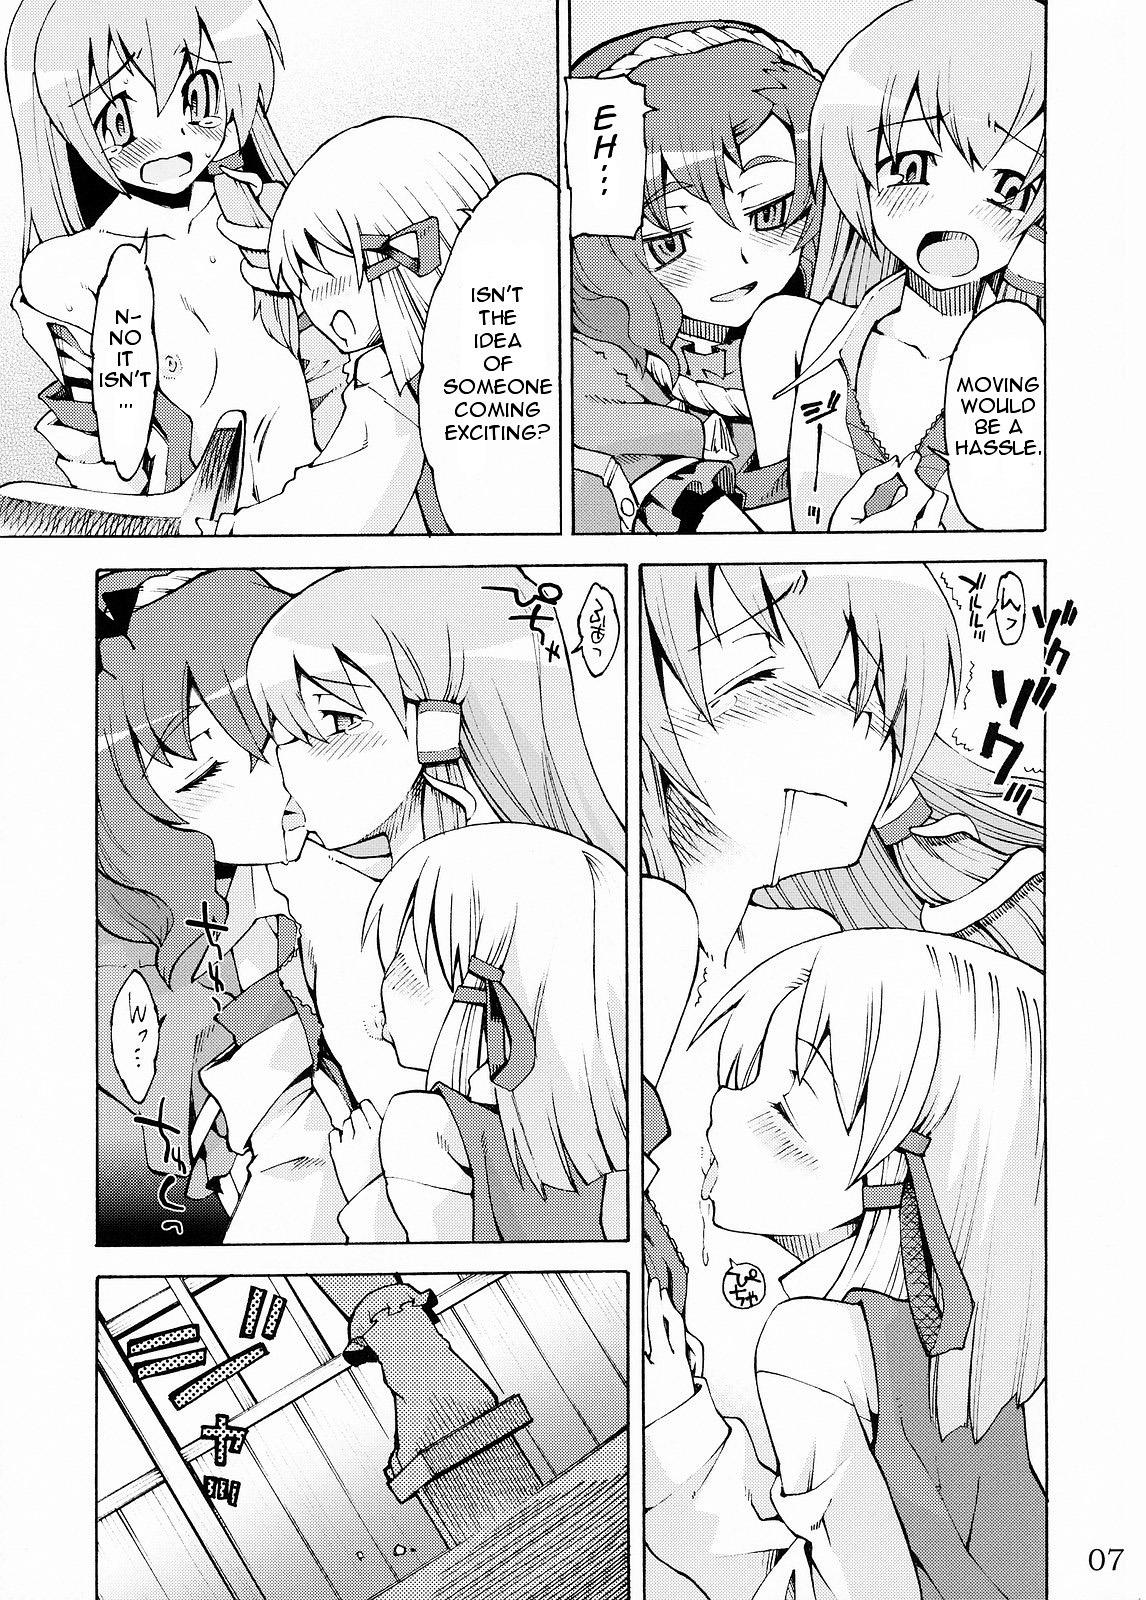 Costume Kami-sama to Issho! Happy every day! - Touhou project Best Blowjob - Page 7